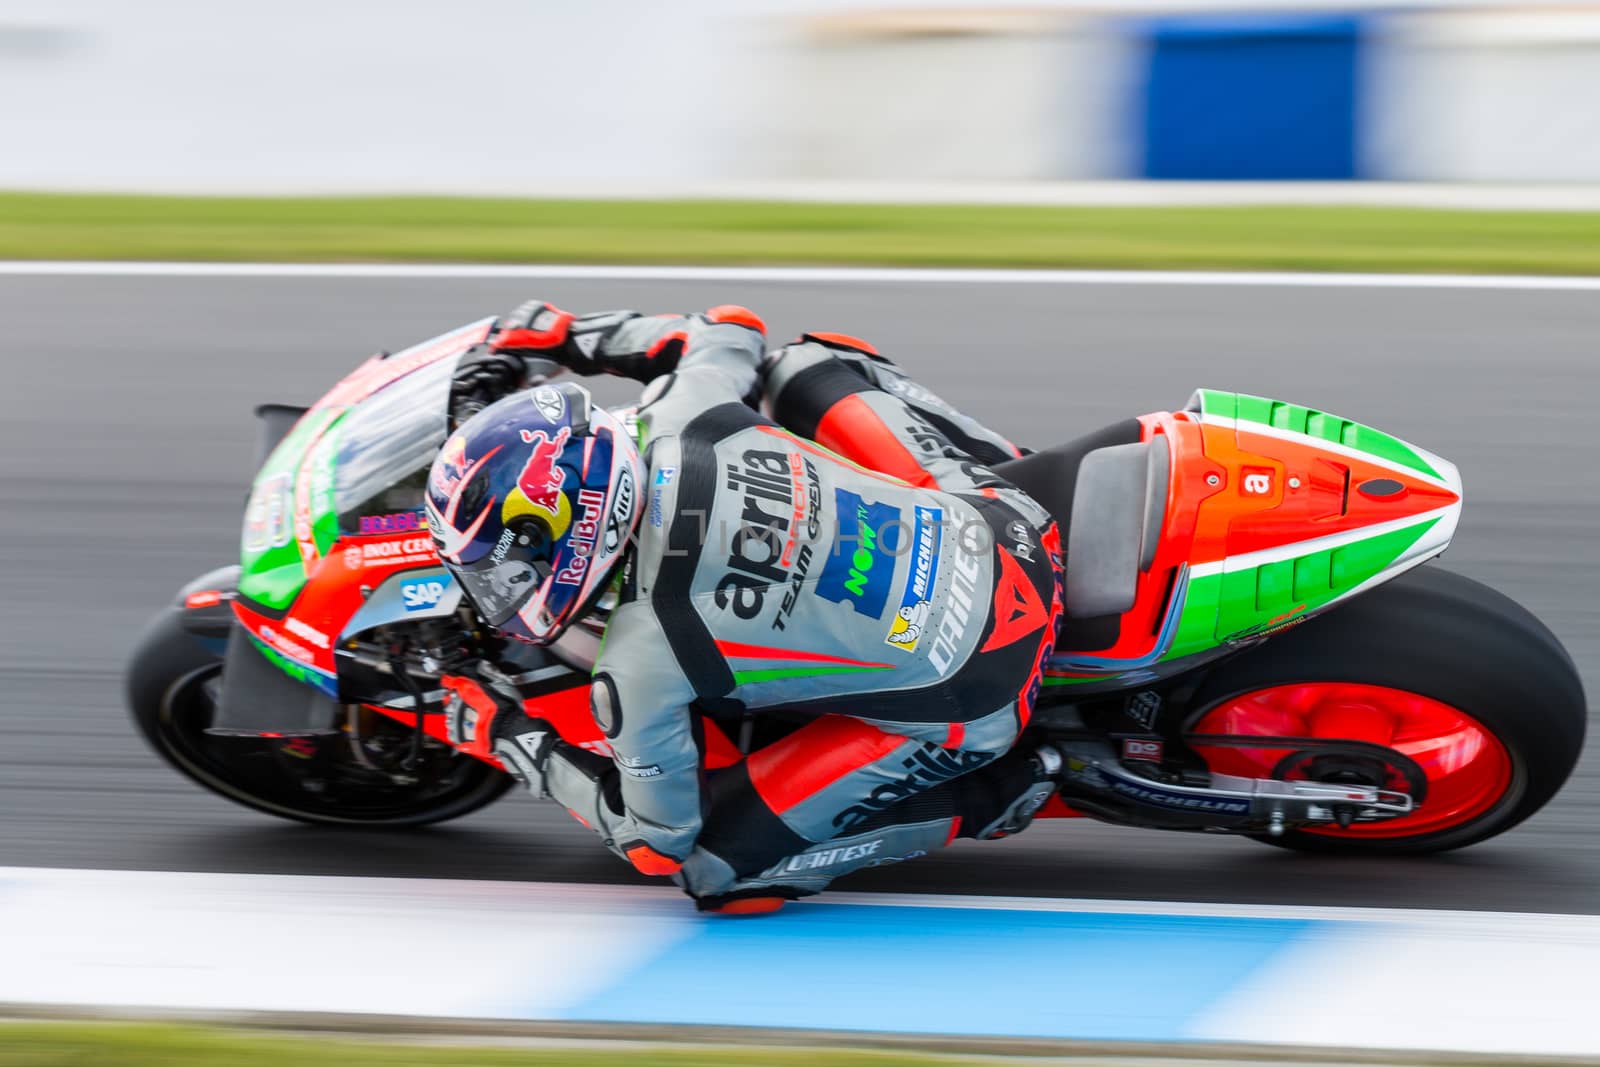 MELBOURNE, AUSTRALIA – OCTOBER 23: Stefan Bradl (DUE) riding the #6 Aprilia Racing Team's Aprilia during the 2016 Michelin Australian Motorcycle Grand Prix  at 2106 Michelin Australian Motorcycle Grand Prix , Australia on October 23 2016. Photo: Dave Hewison